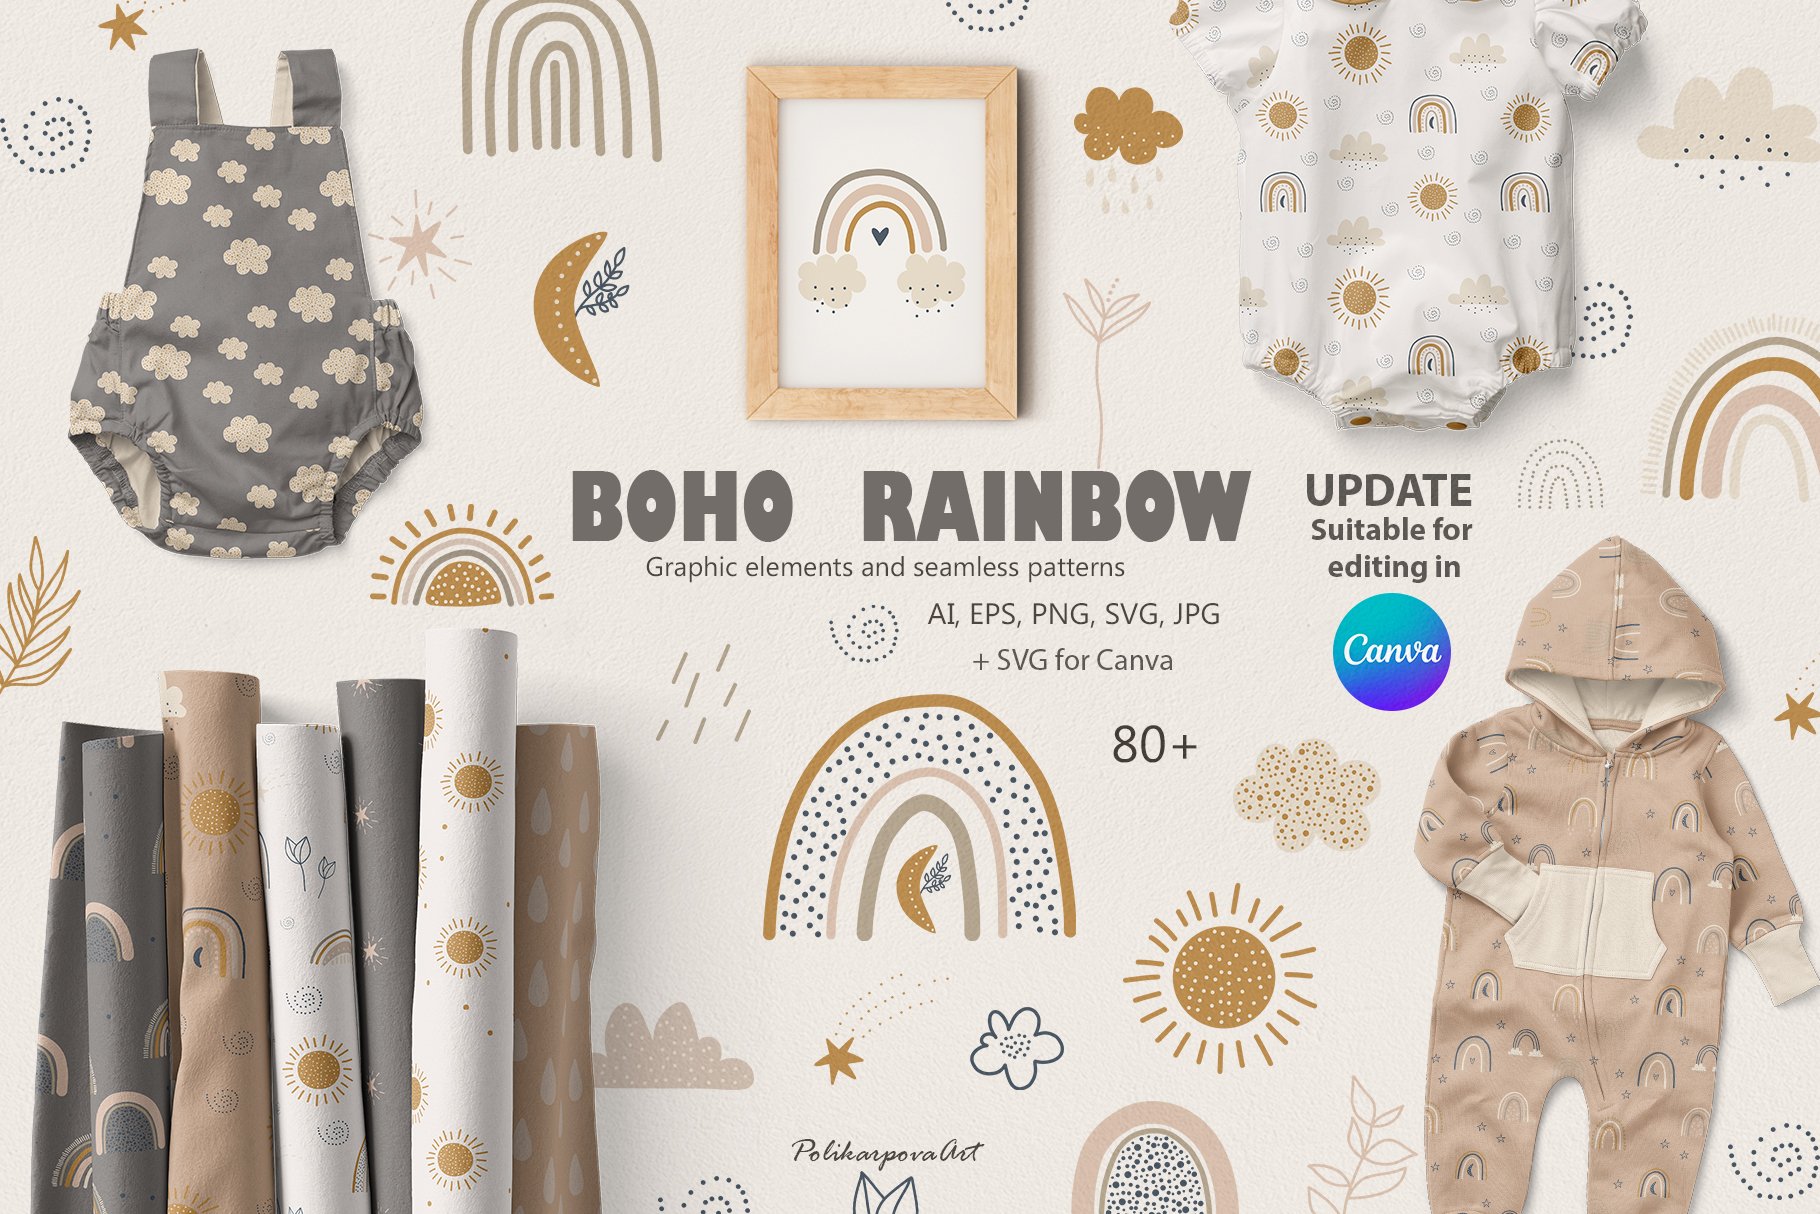 BOHO Rainbow clipart and patterns cover image.